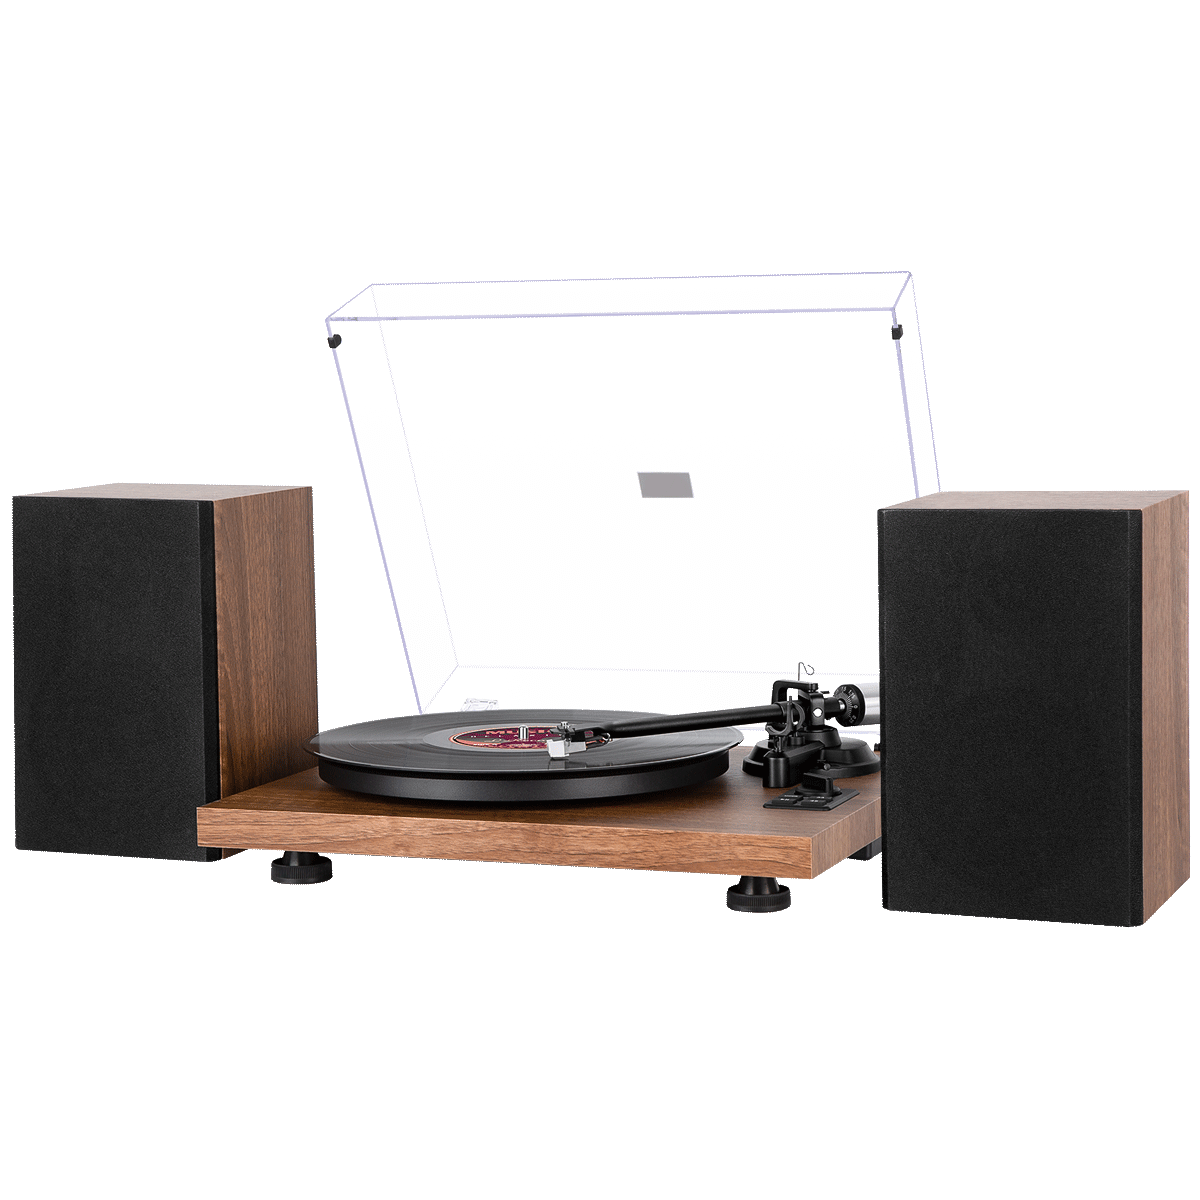 1byone turntable H009